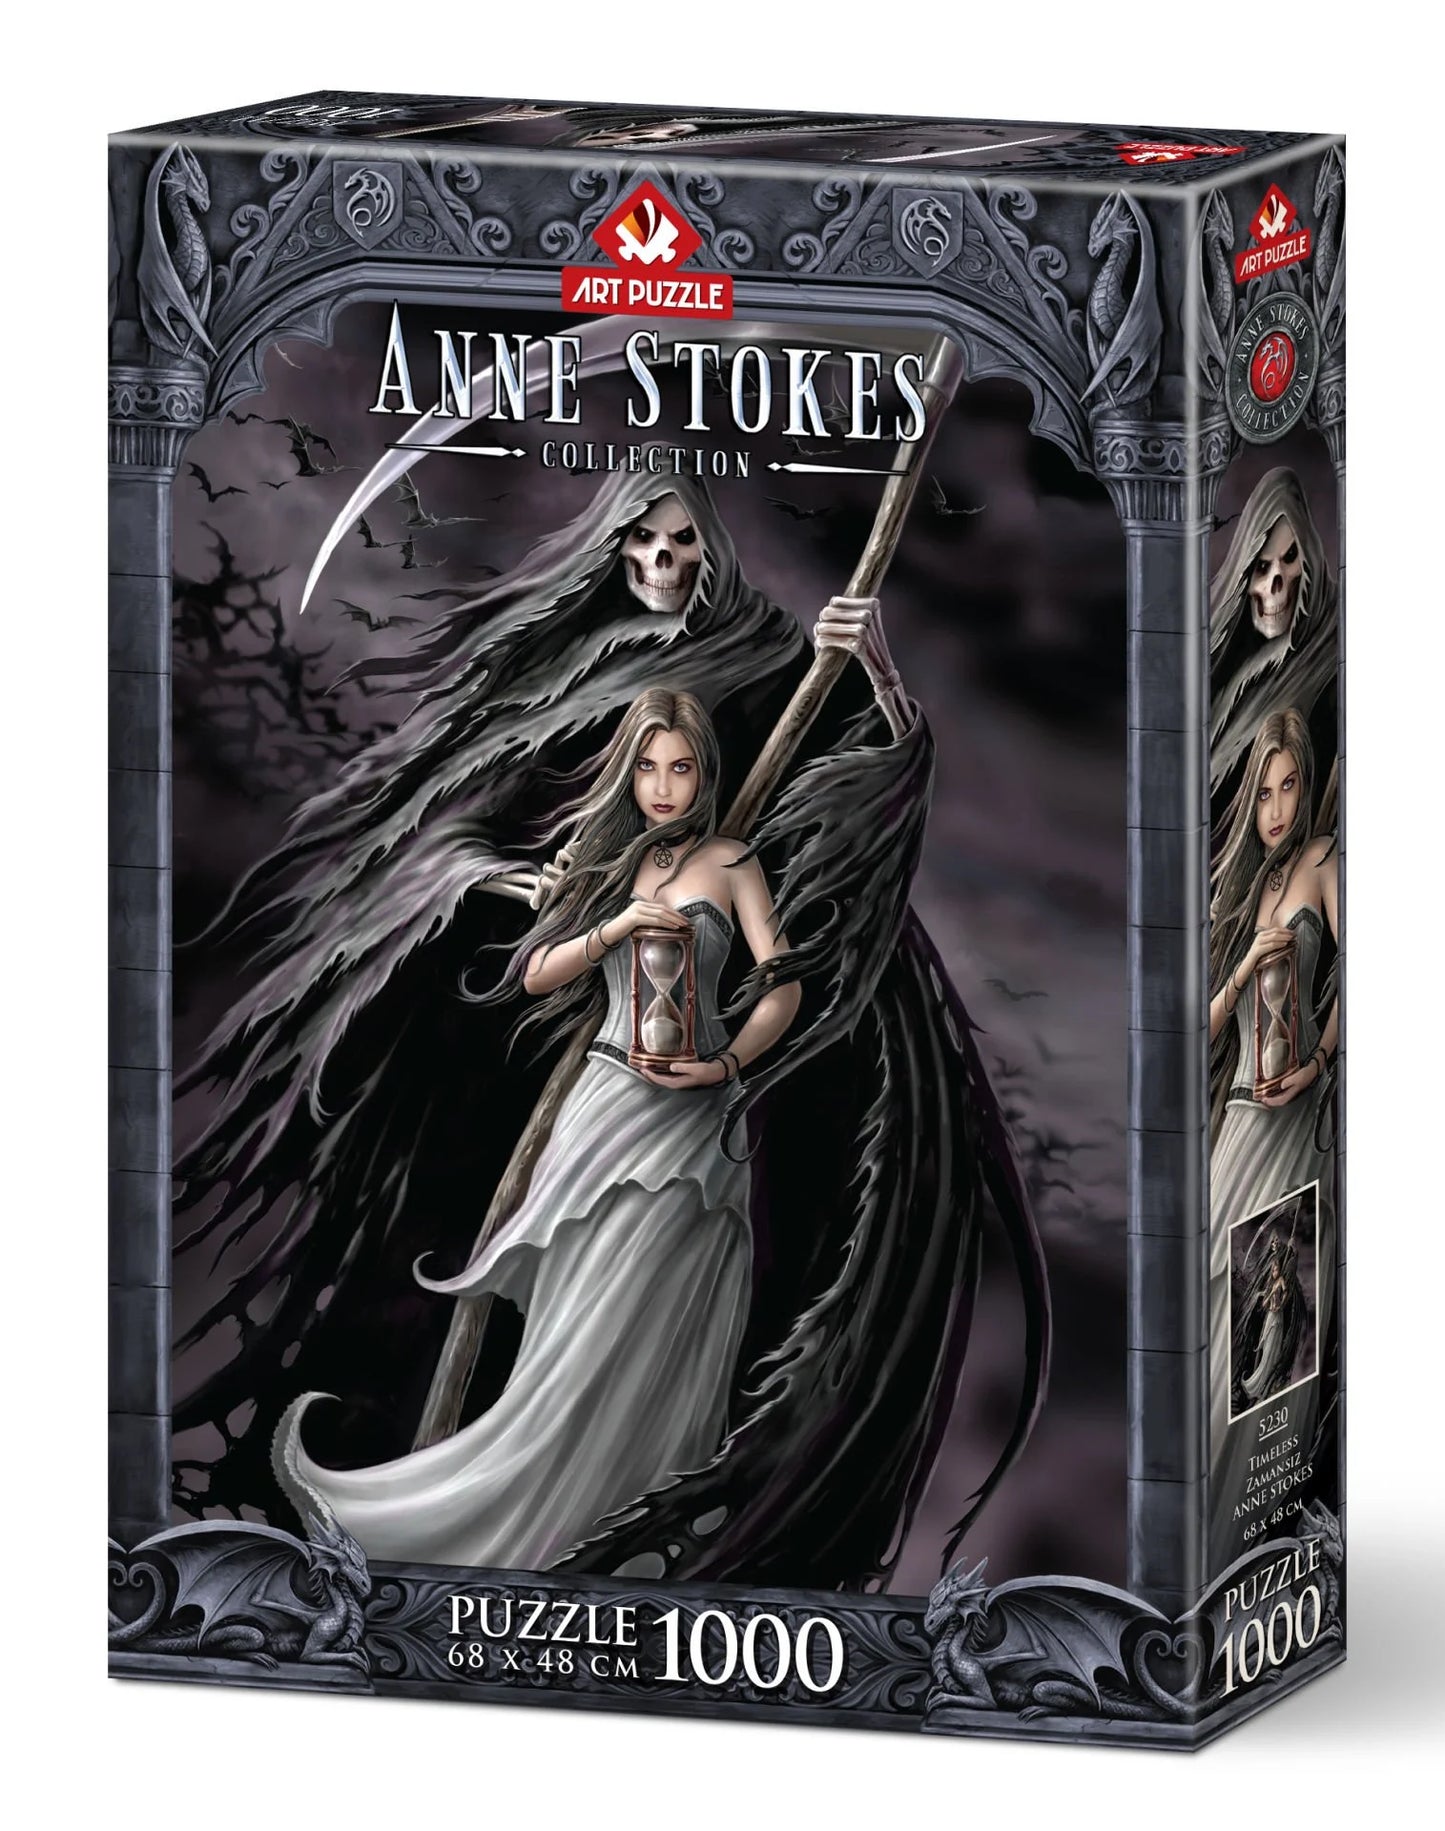 Summon the Reaper by Anne Stokes, 1000 Piece Puzzle